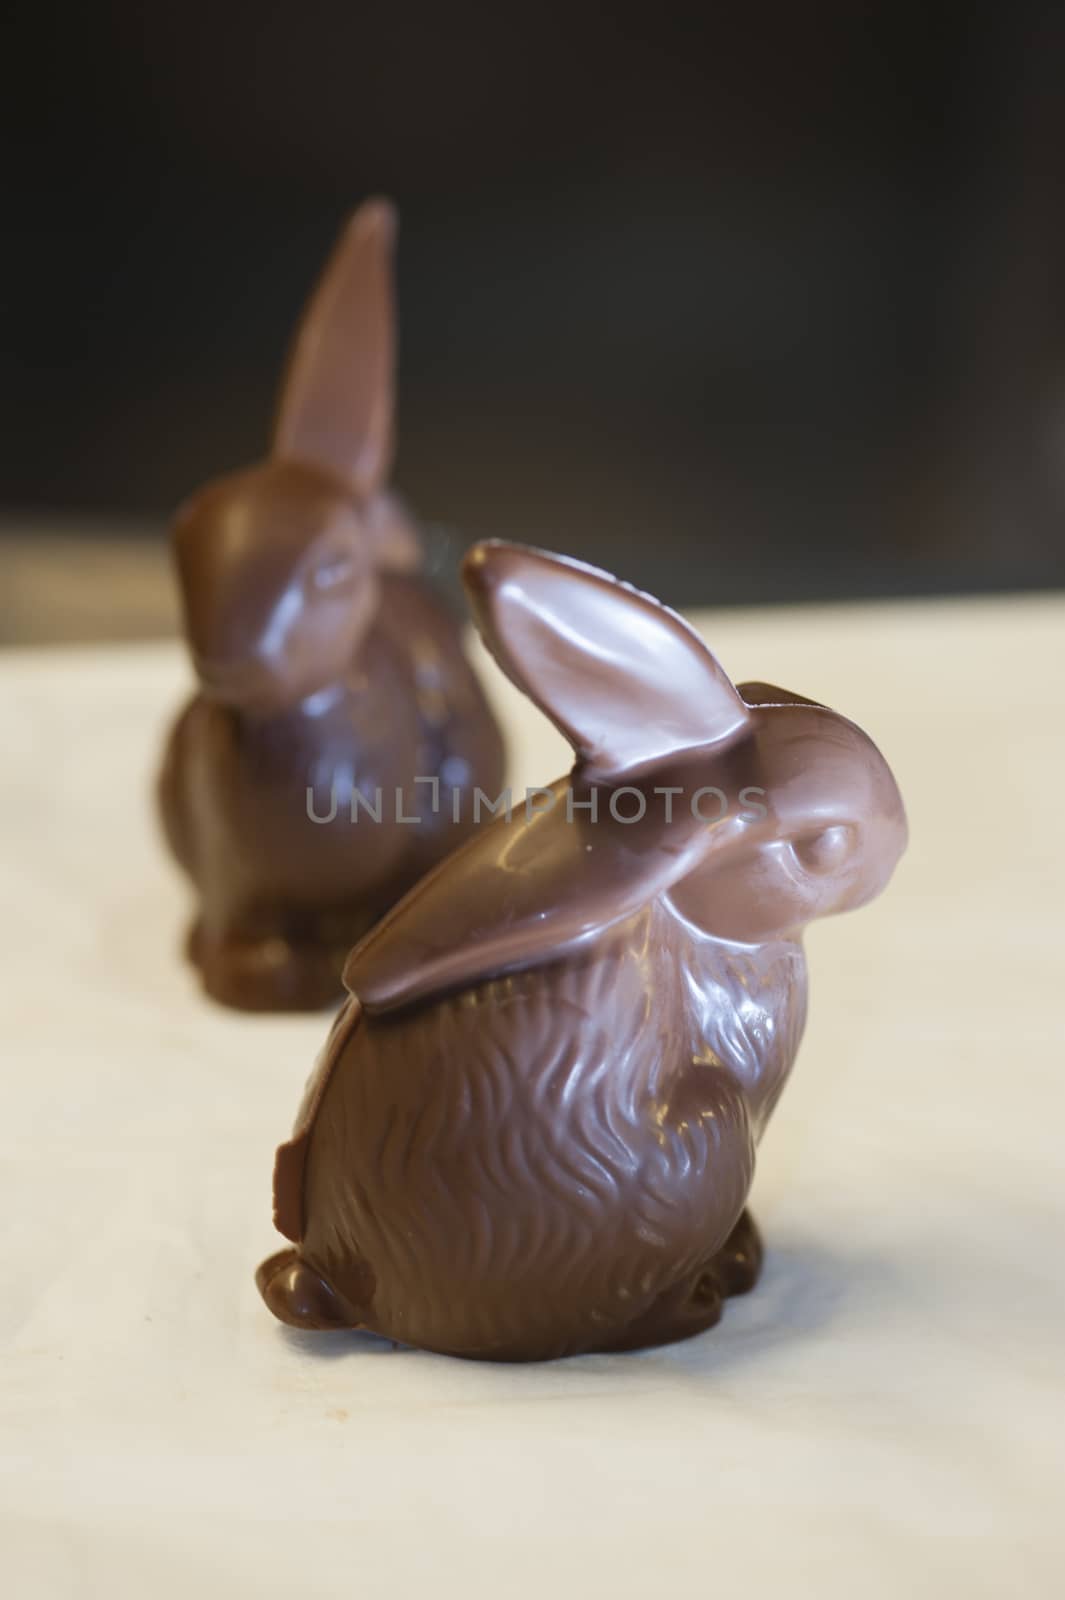 Ingredients and preparation of italian Easter milk and dark choccolate eggs and sweets